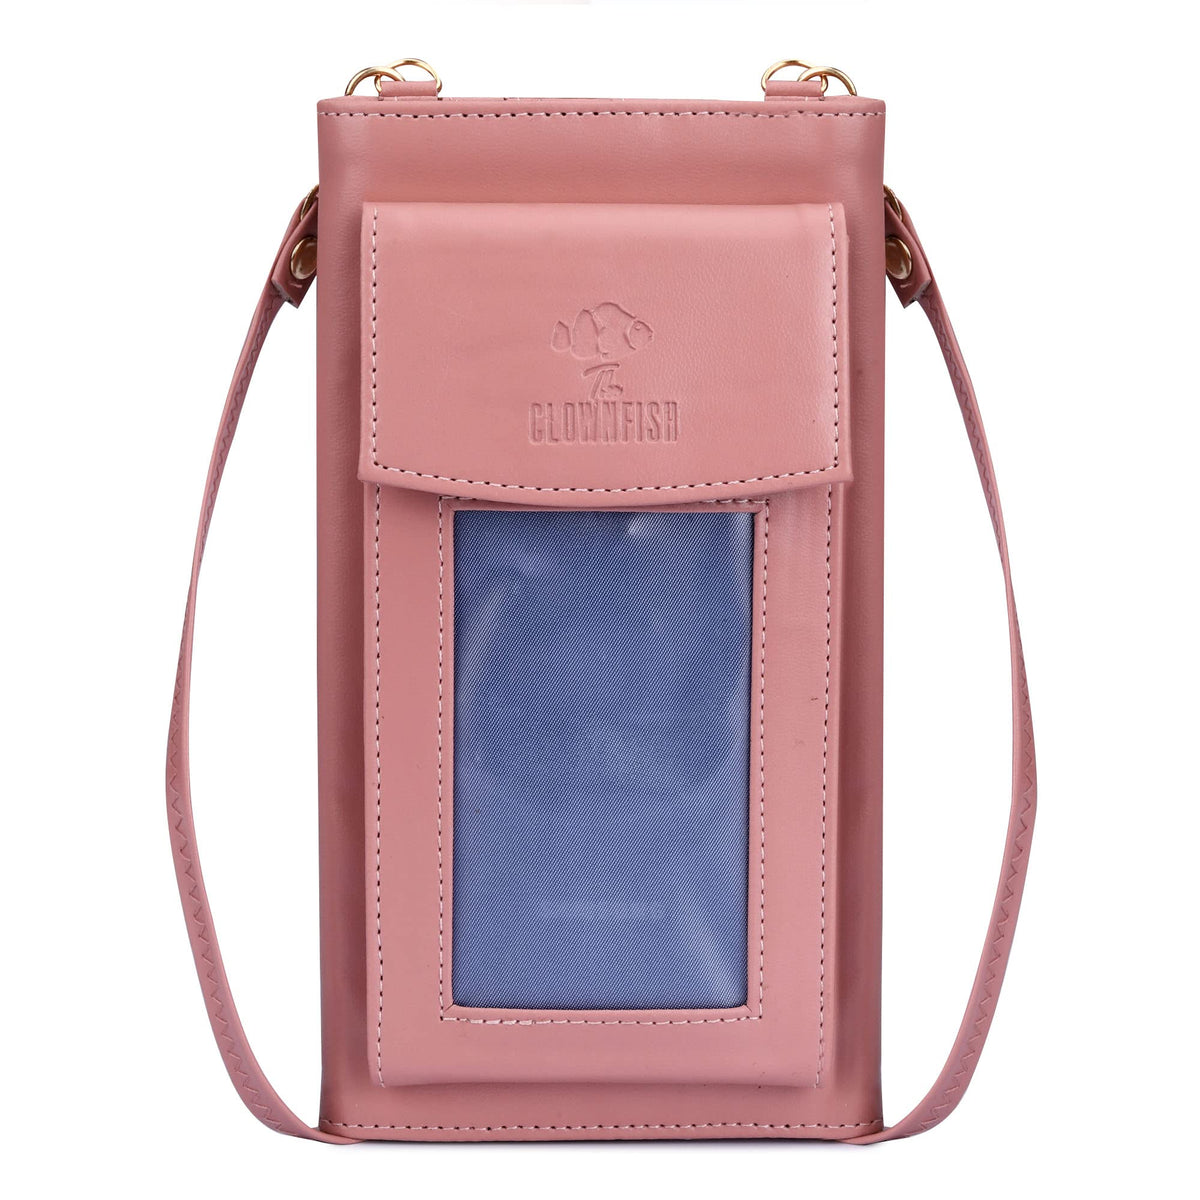 The Clownfish Winslet Ladies Wallet Womens Sling Bag with Transparent Front Mobile Pocket (Pink)